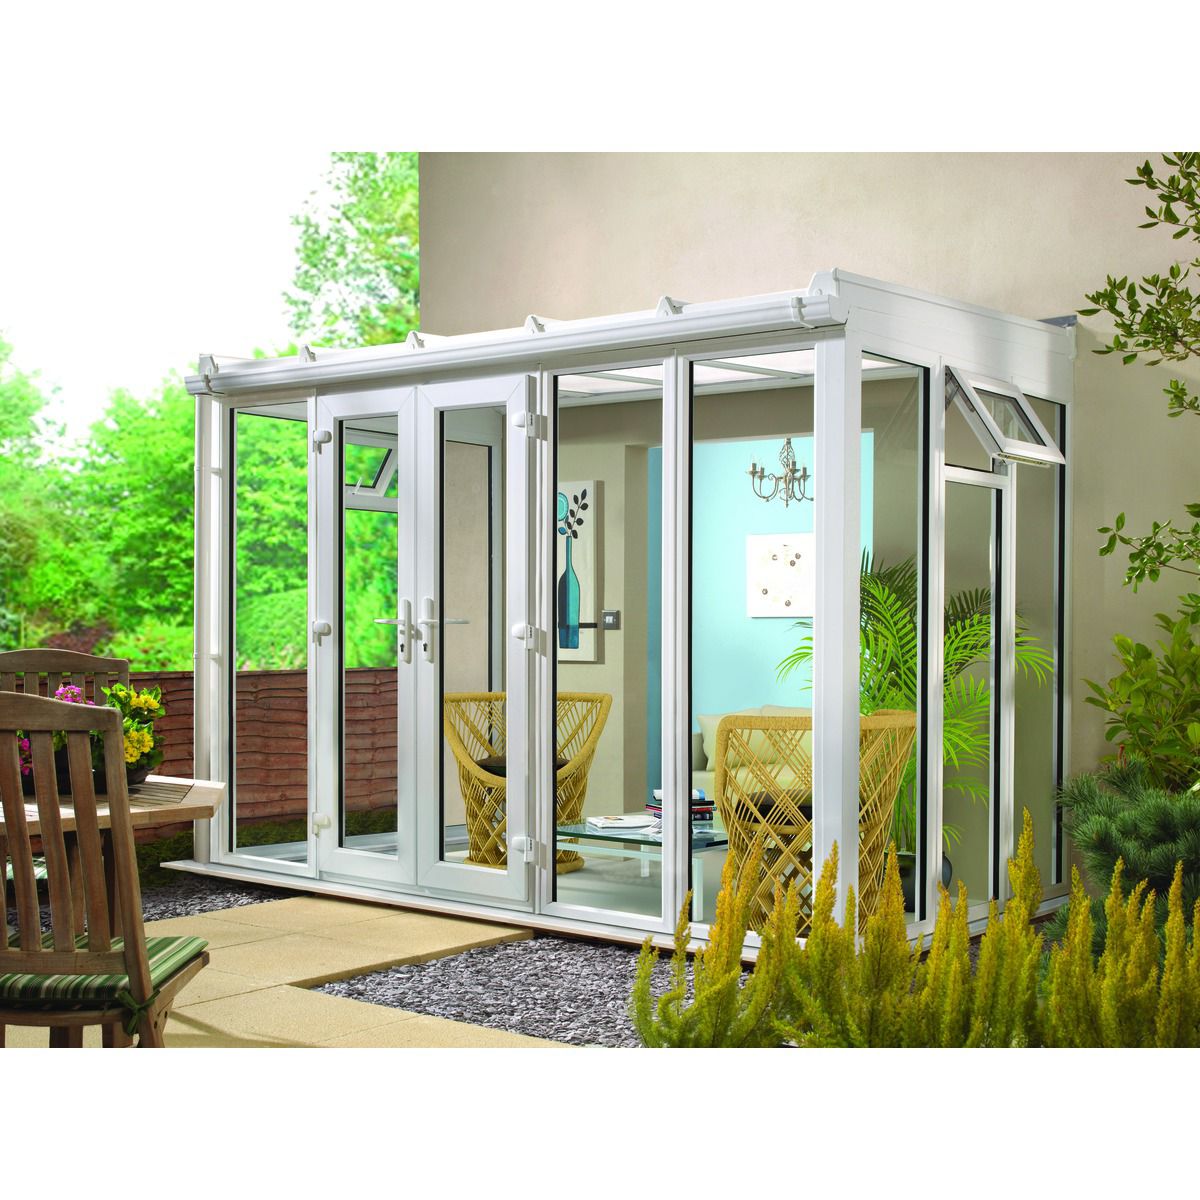 Image of Euramax Lean To Full Glass White Roof Conservatory - 10 x 8ft